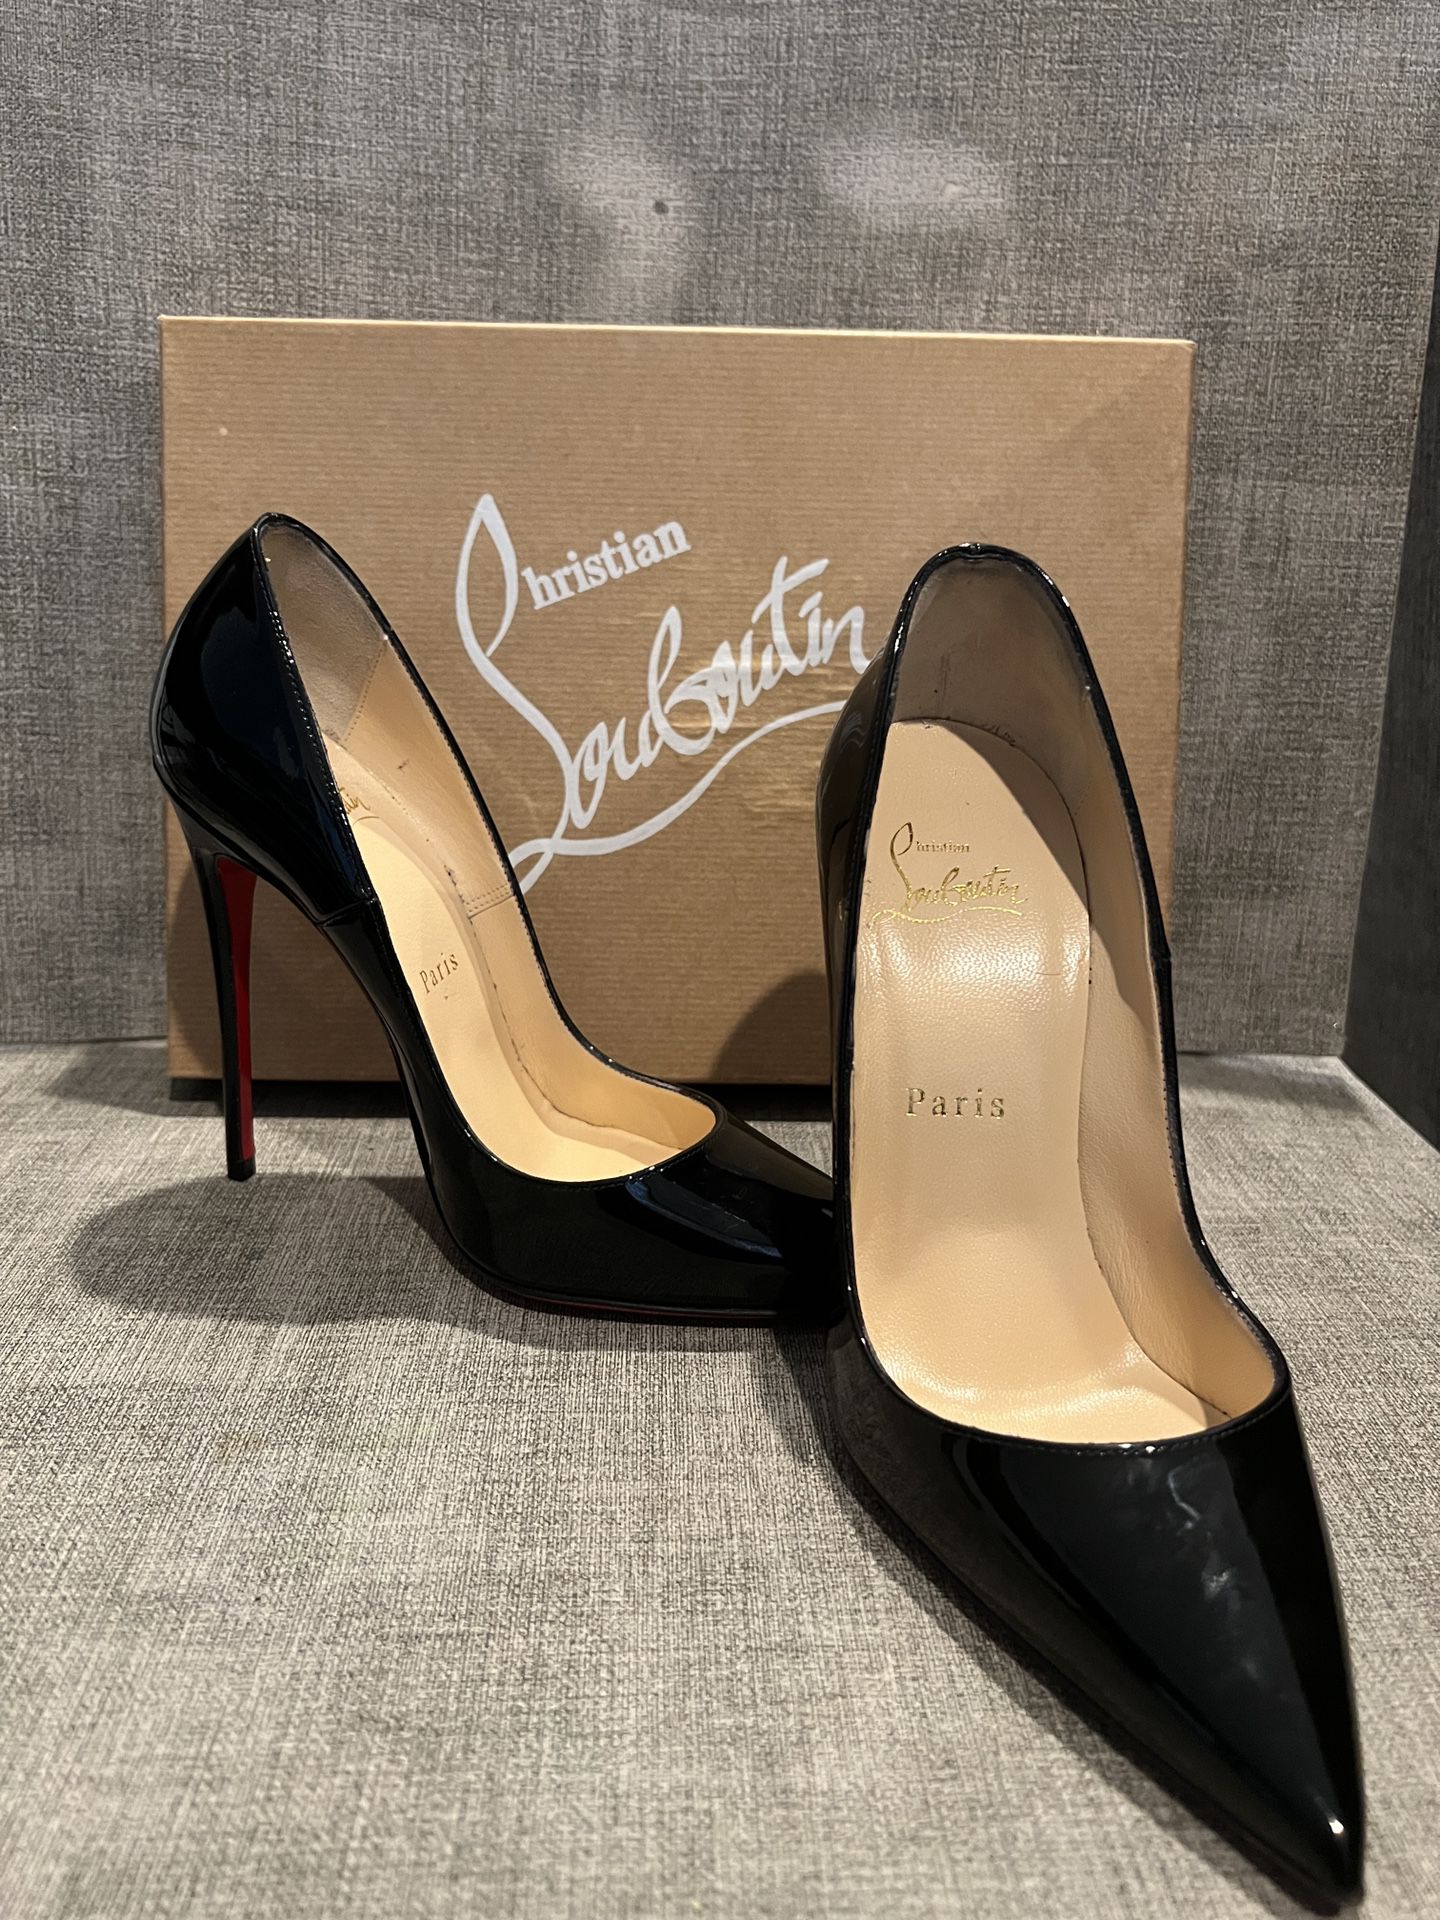 Christian Lou Boutin High heel Boots for Sale in Los Angeles, CA - OfferUp